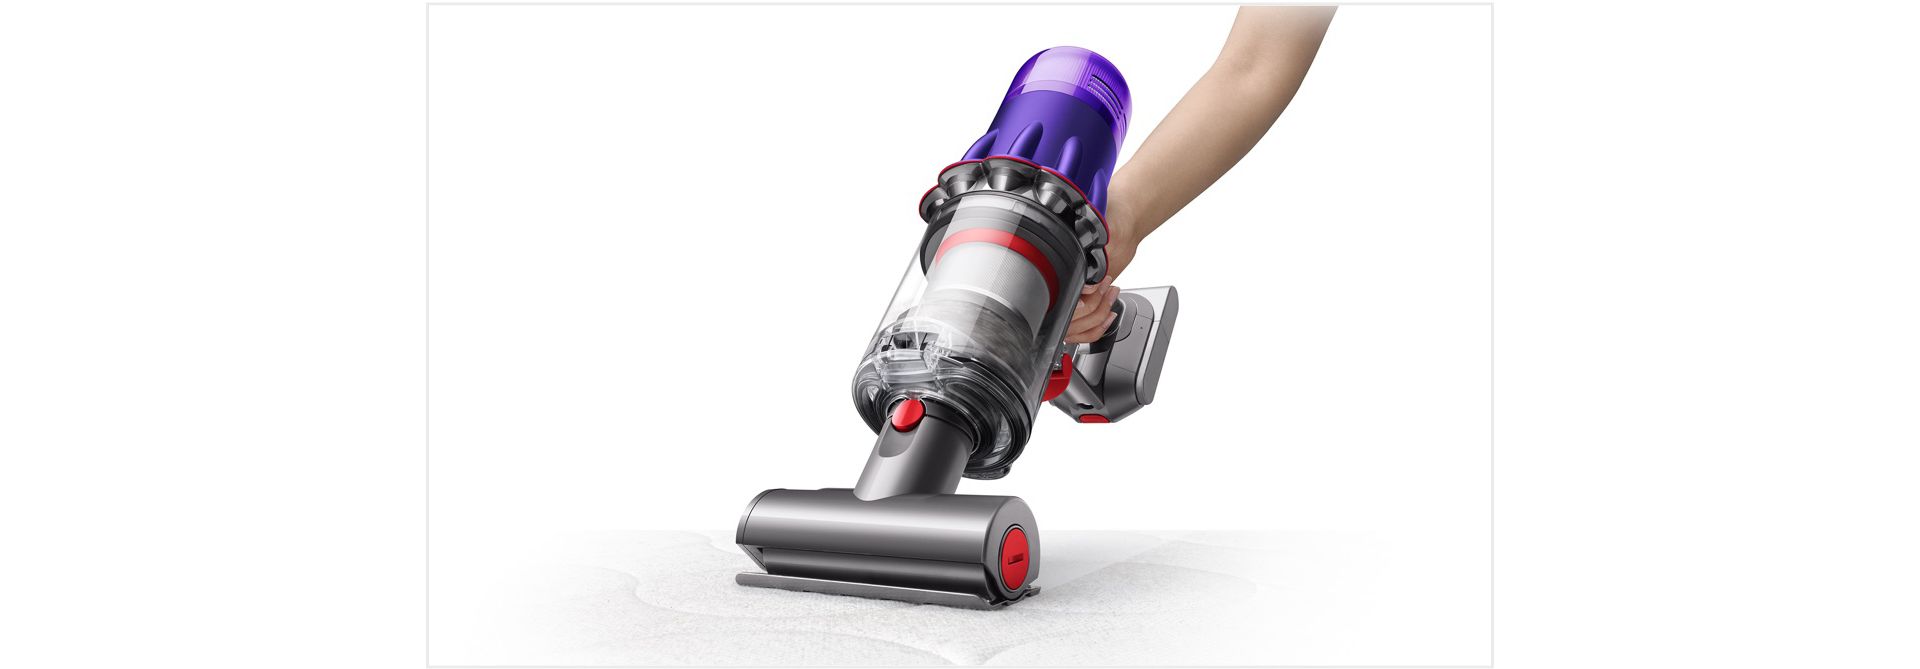 dyson mattress cleaner review